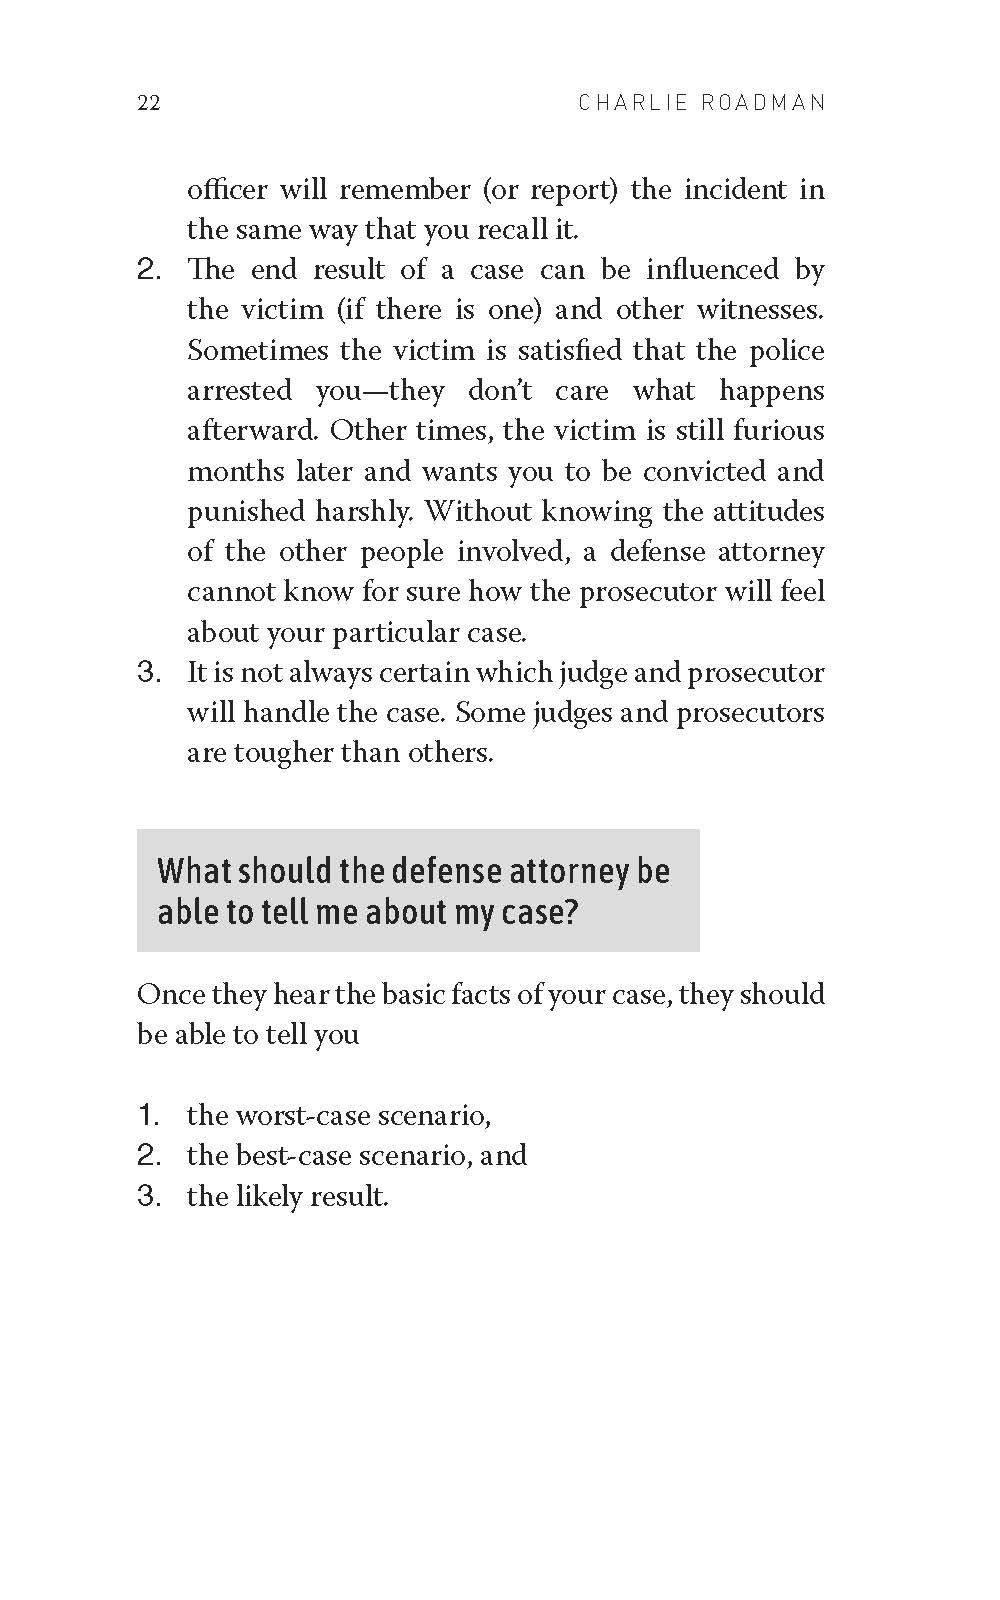 Sample_of_Defendant_s_Guide_to_Defense_Page_24.jpg